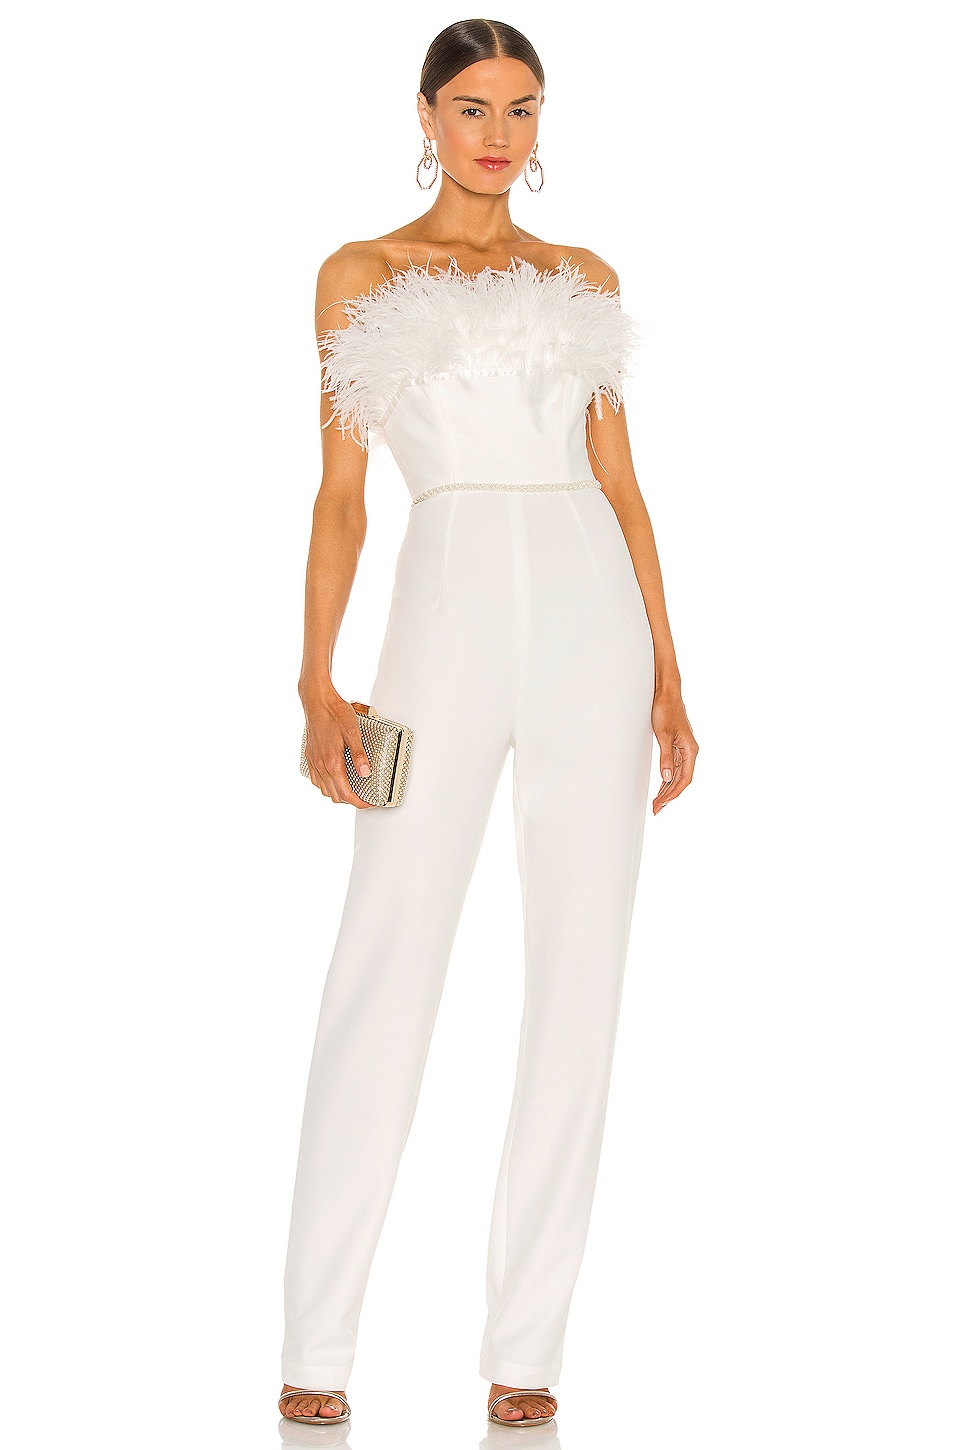 White Strapless Rehearsal Dinner Jumpsuit with Feathers by Revolve